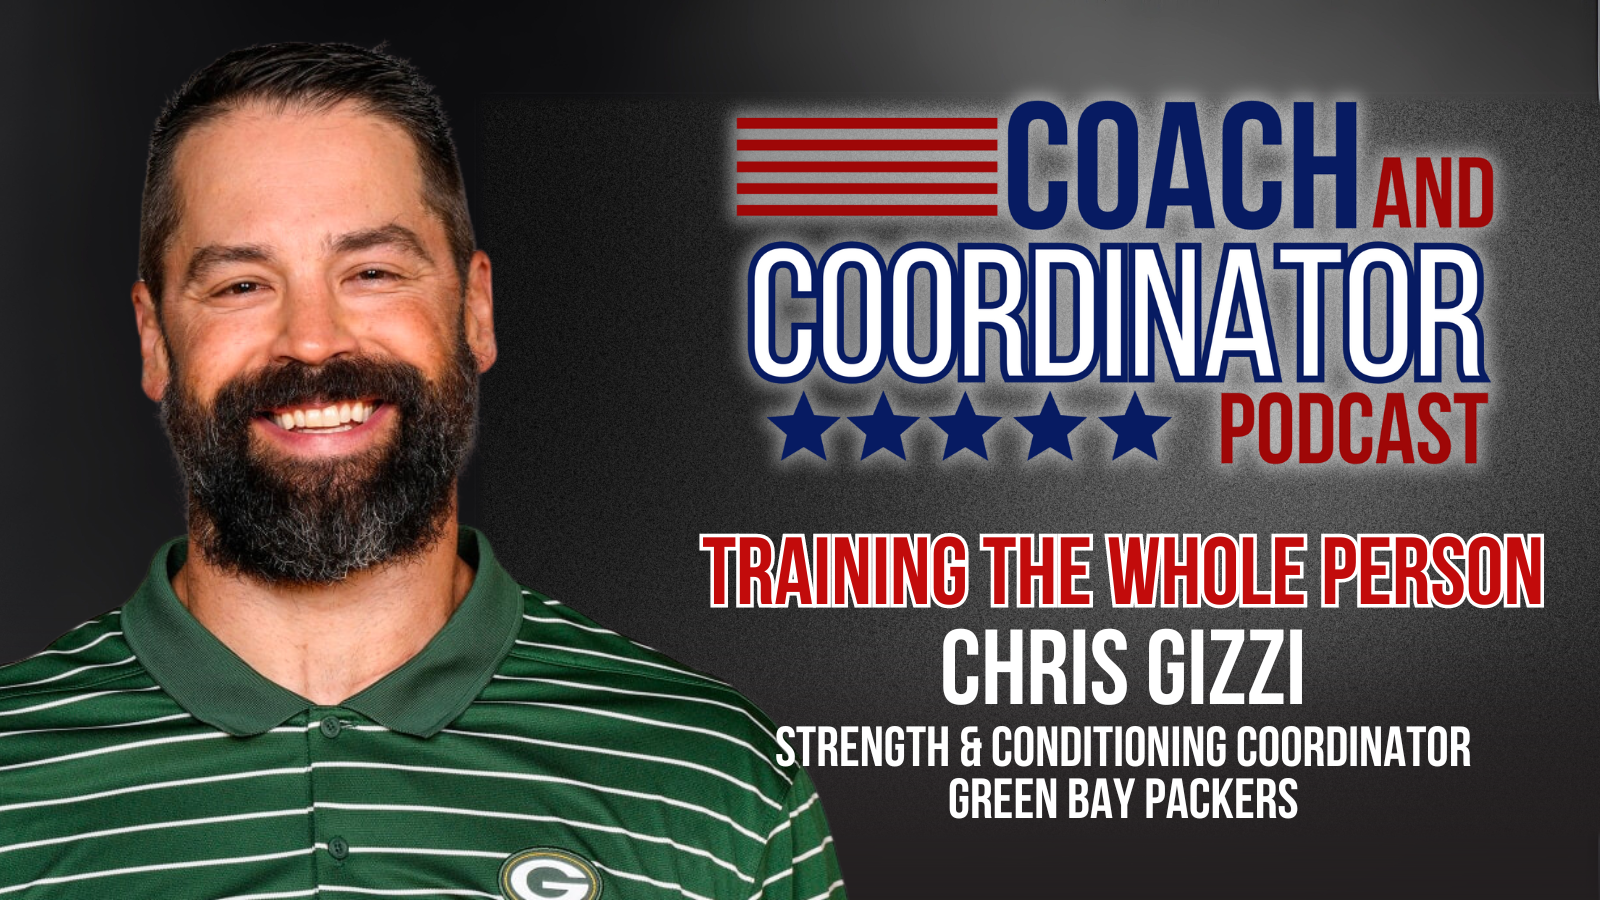 Chris Gizzi, Strength & Conditioning Coordinator, Green Bay Packers